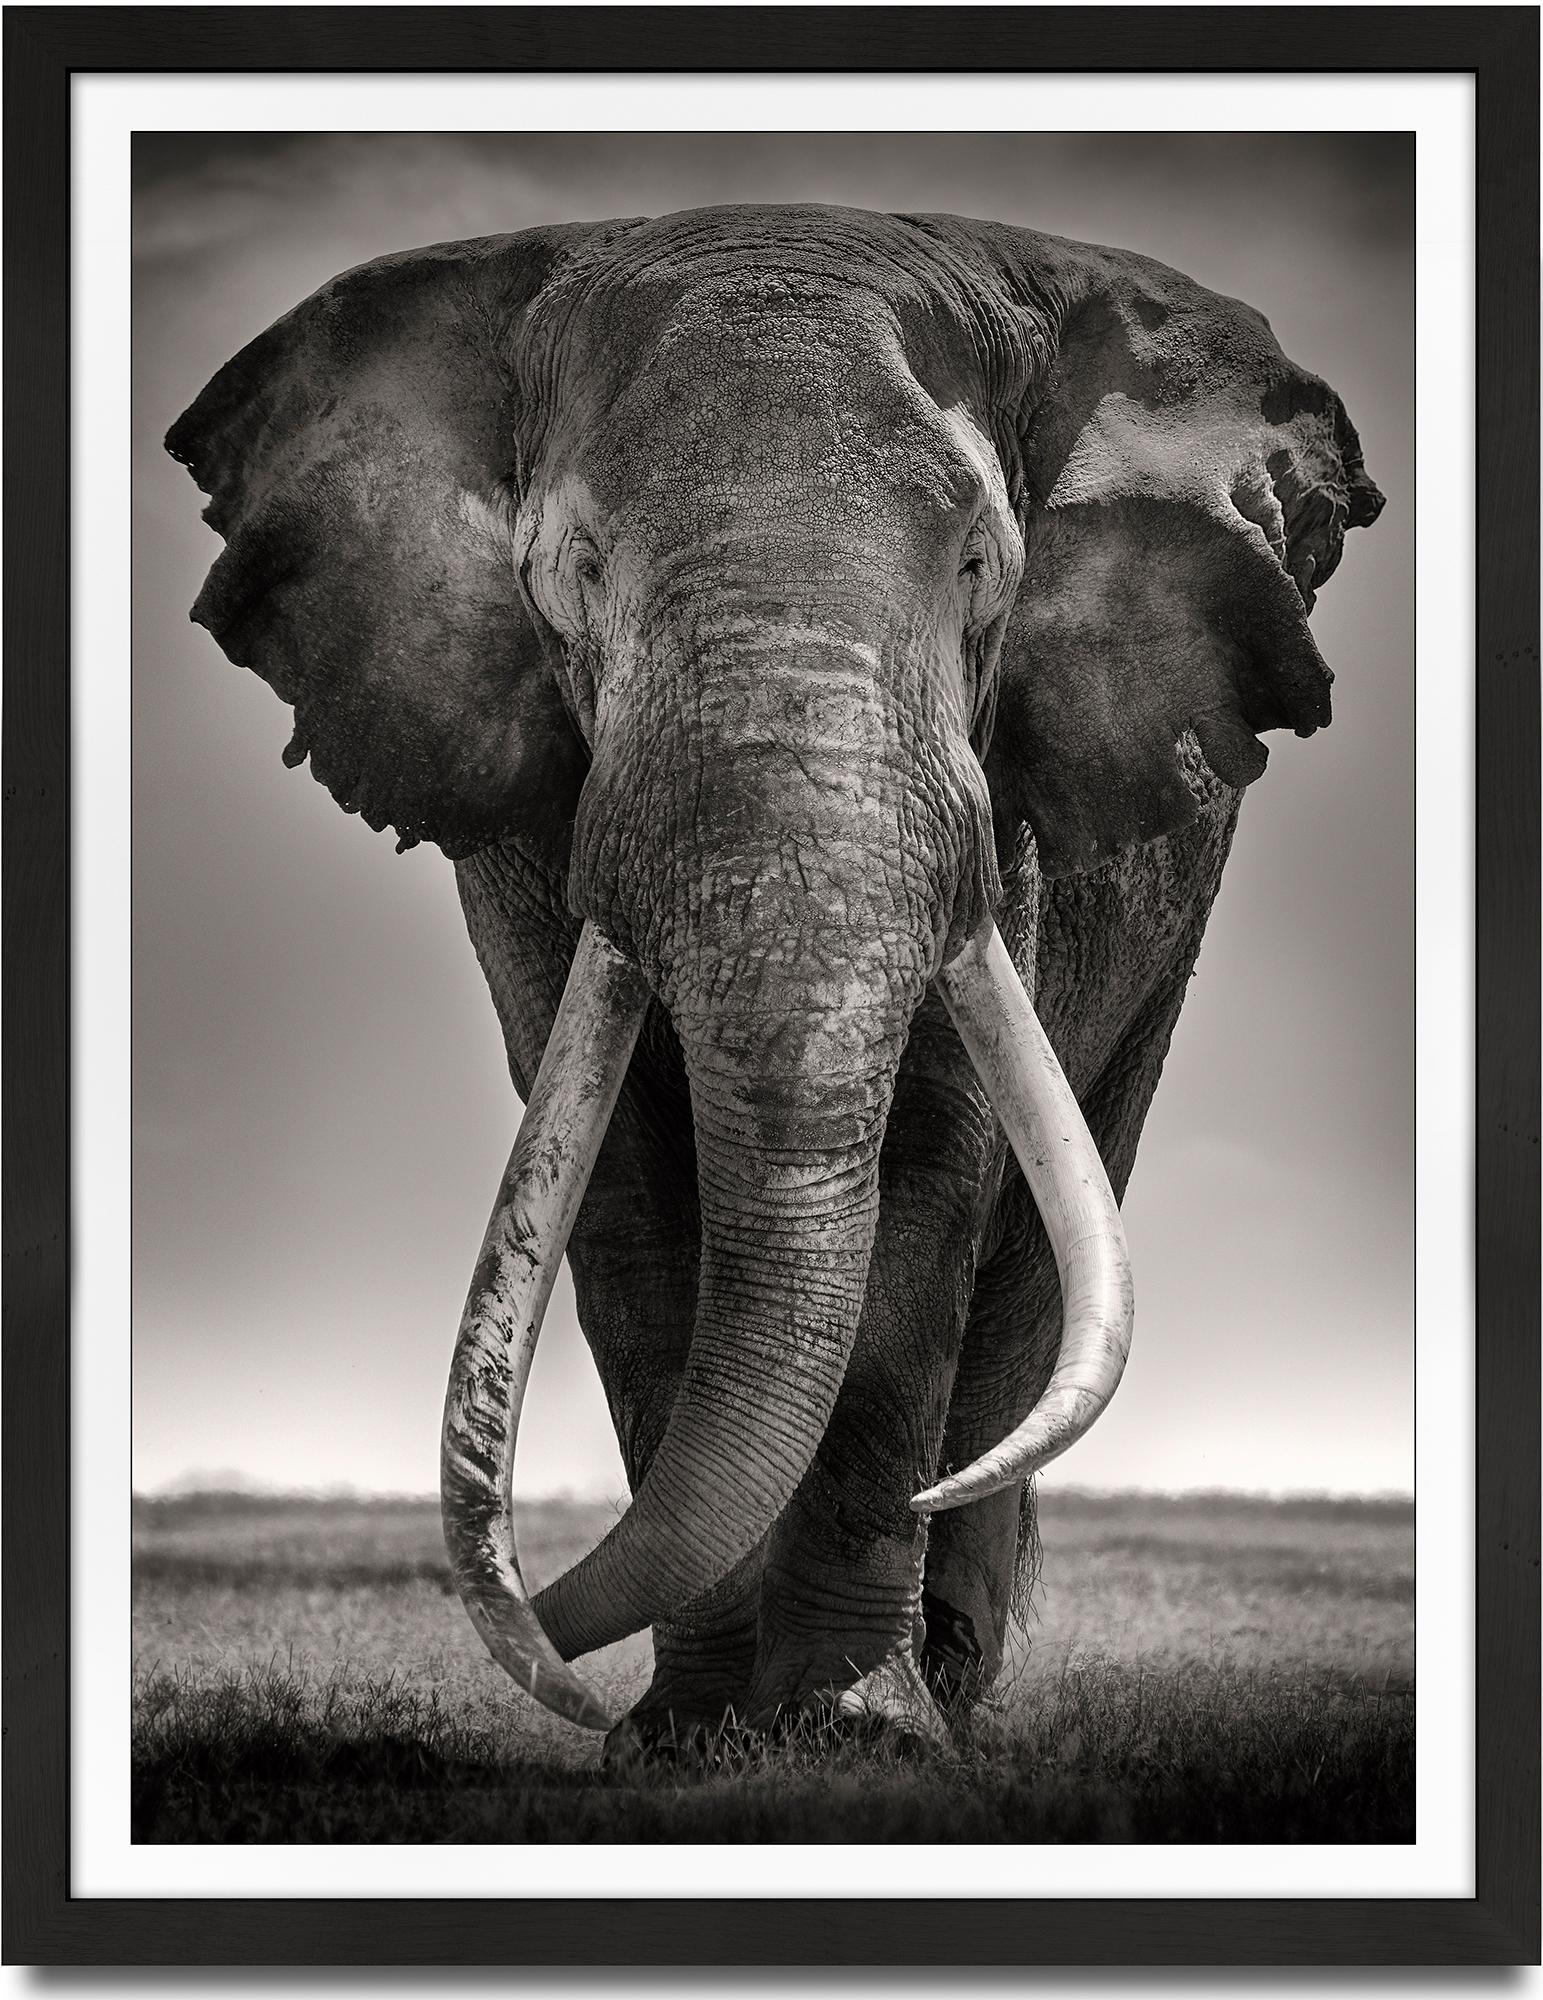 Preserver of Peace I, animal, wildlife, black and white photography, elephant - Photograph by Joachim Schmeisser